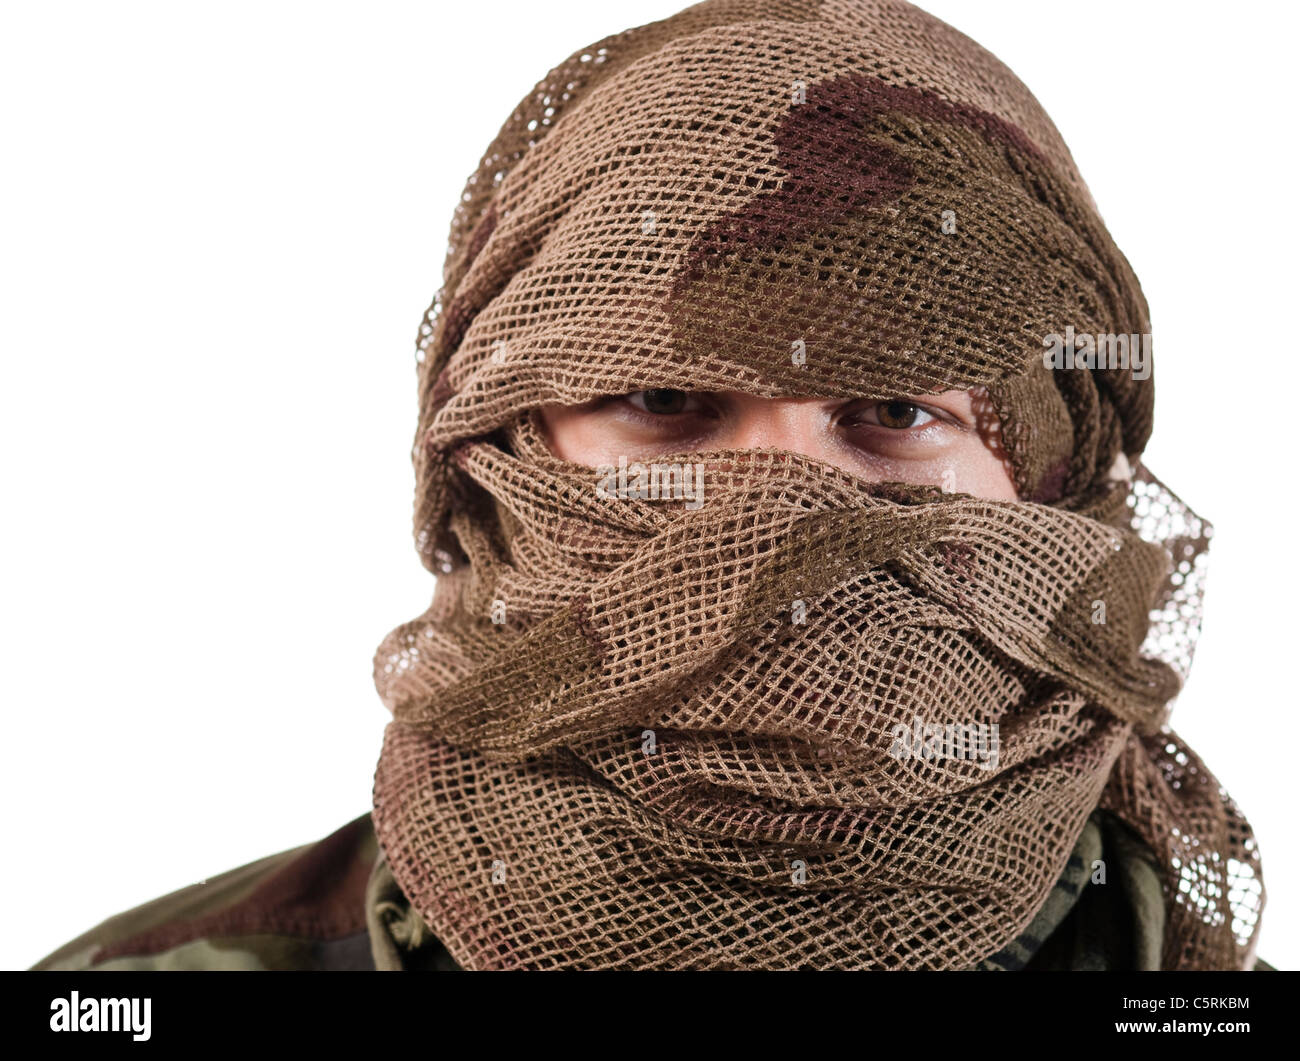 A hidden face of a guerrilla warrior with serious stare on eyes. Stock Photo